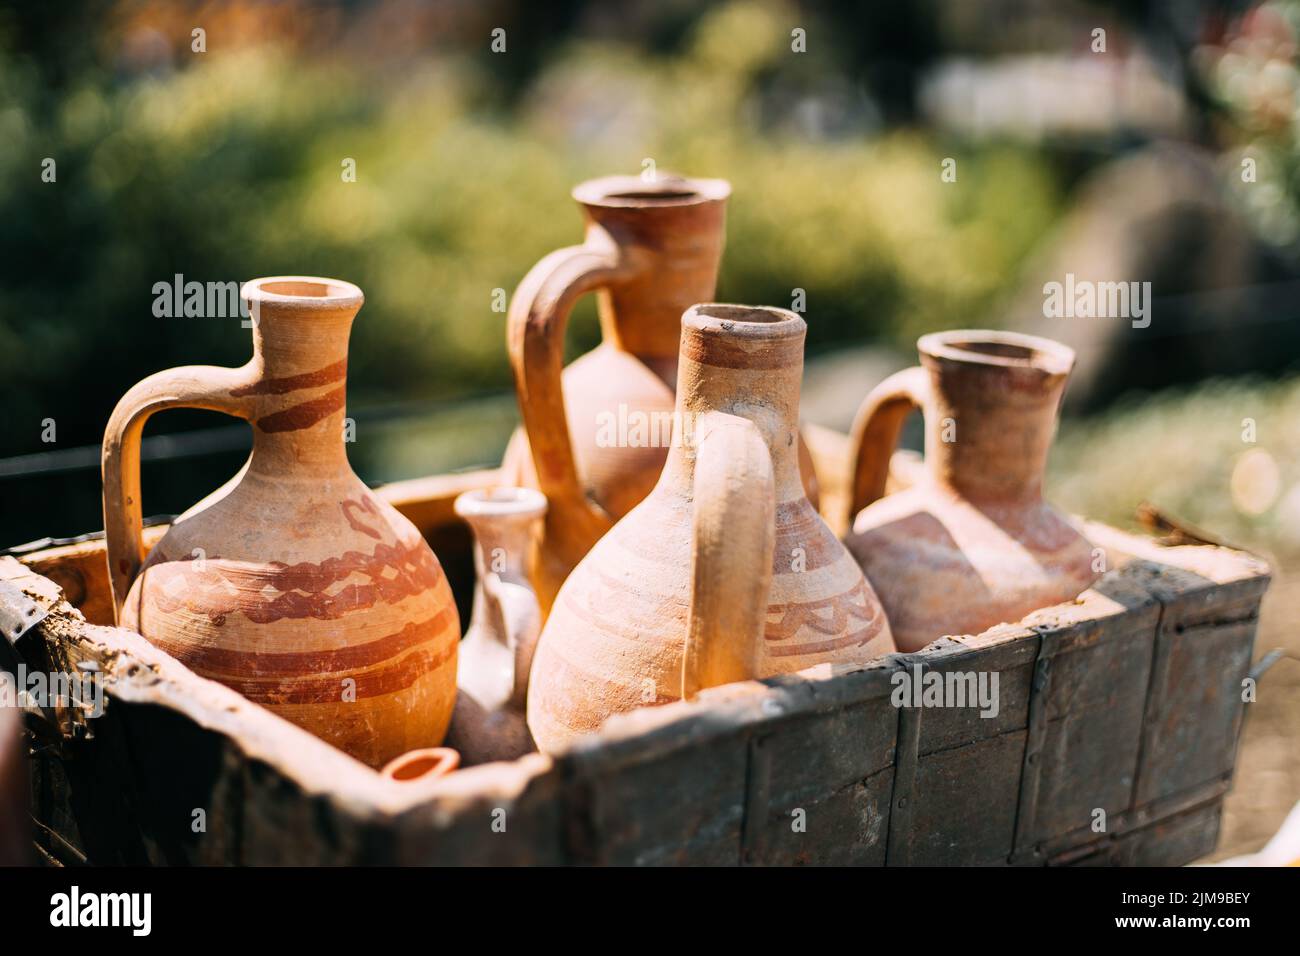 Set Of Traditional Georgian Clay Wine Jugs. Oriental Handmade Clay Jugs For Wine. Georgian Traditional Clay Vessel For Wine Stock Photo